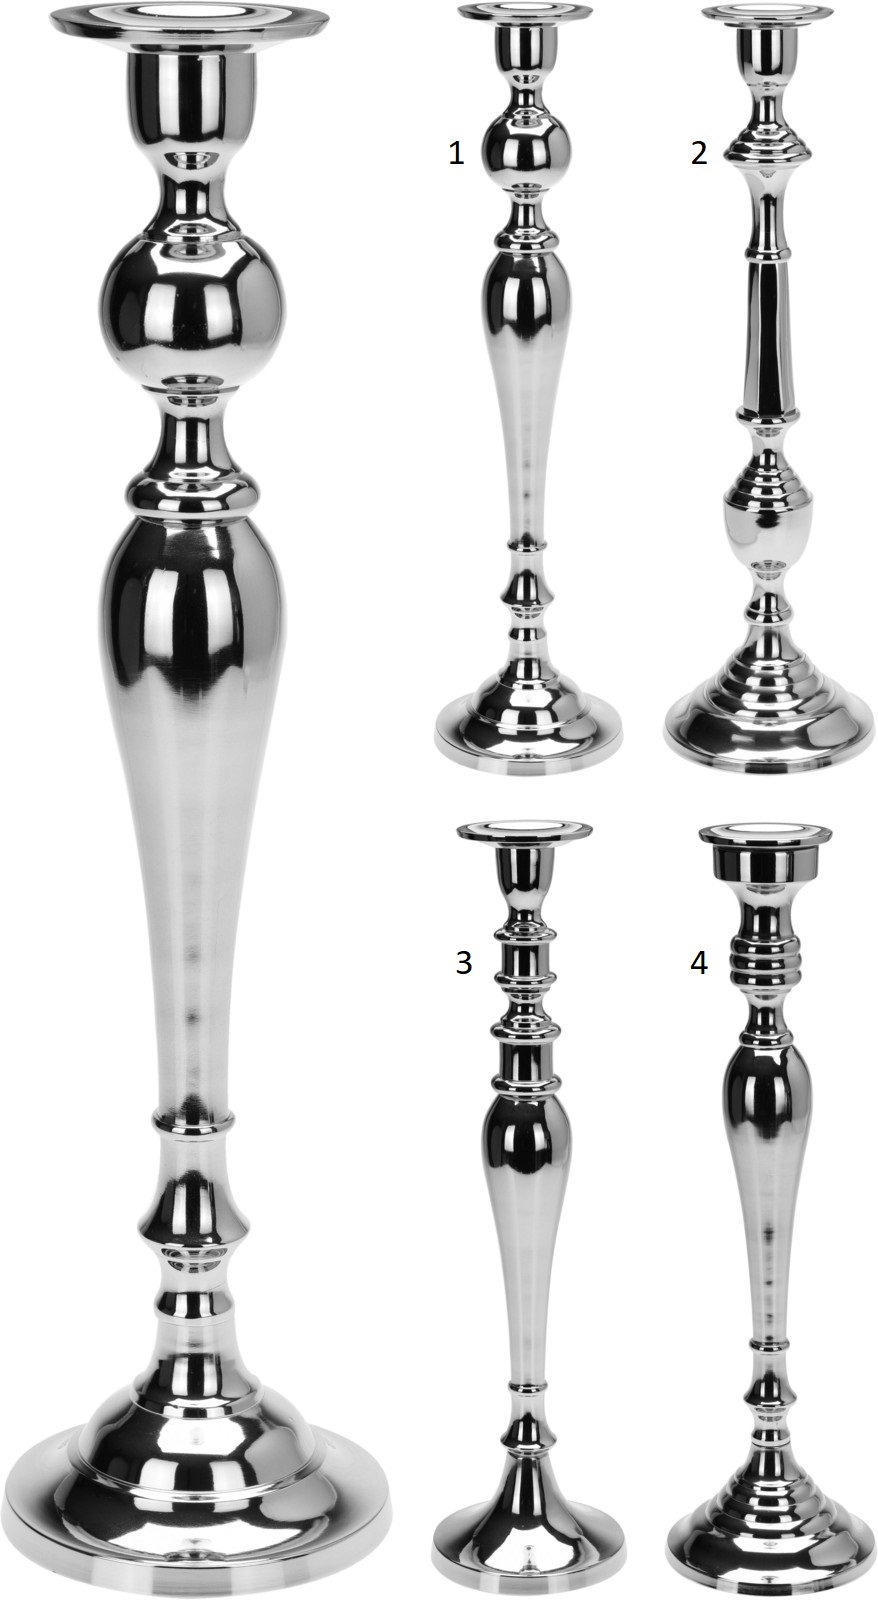 CANDLE HOLDER SILVER 48CM 4 ASSORTED DESIGNS